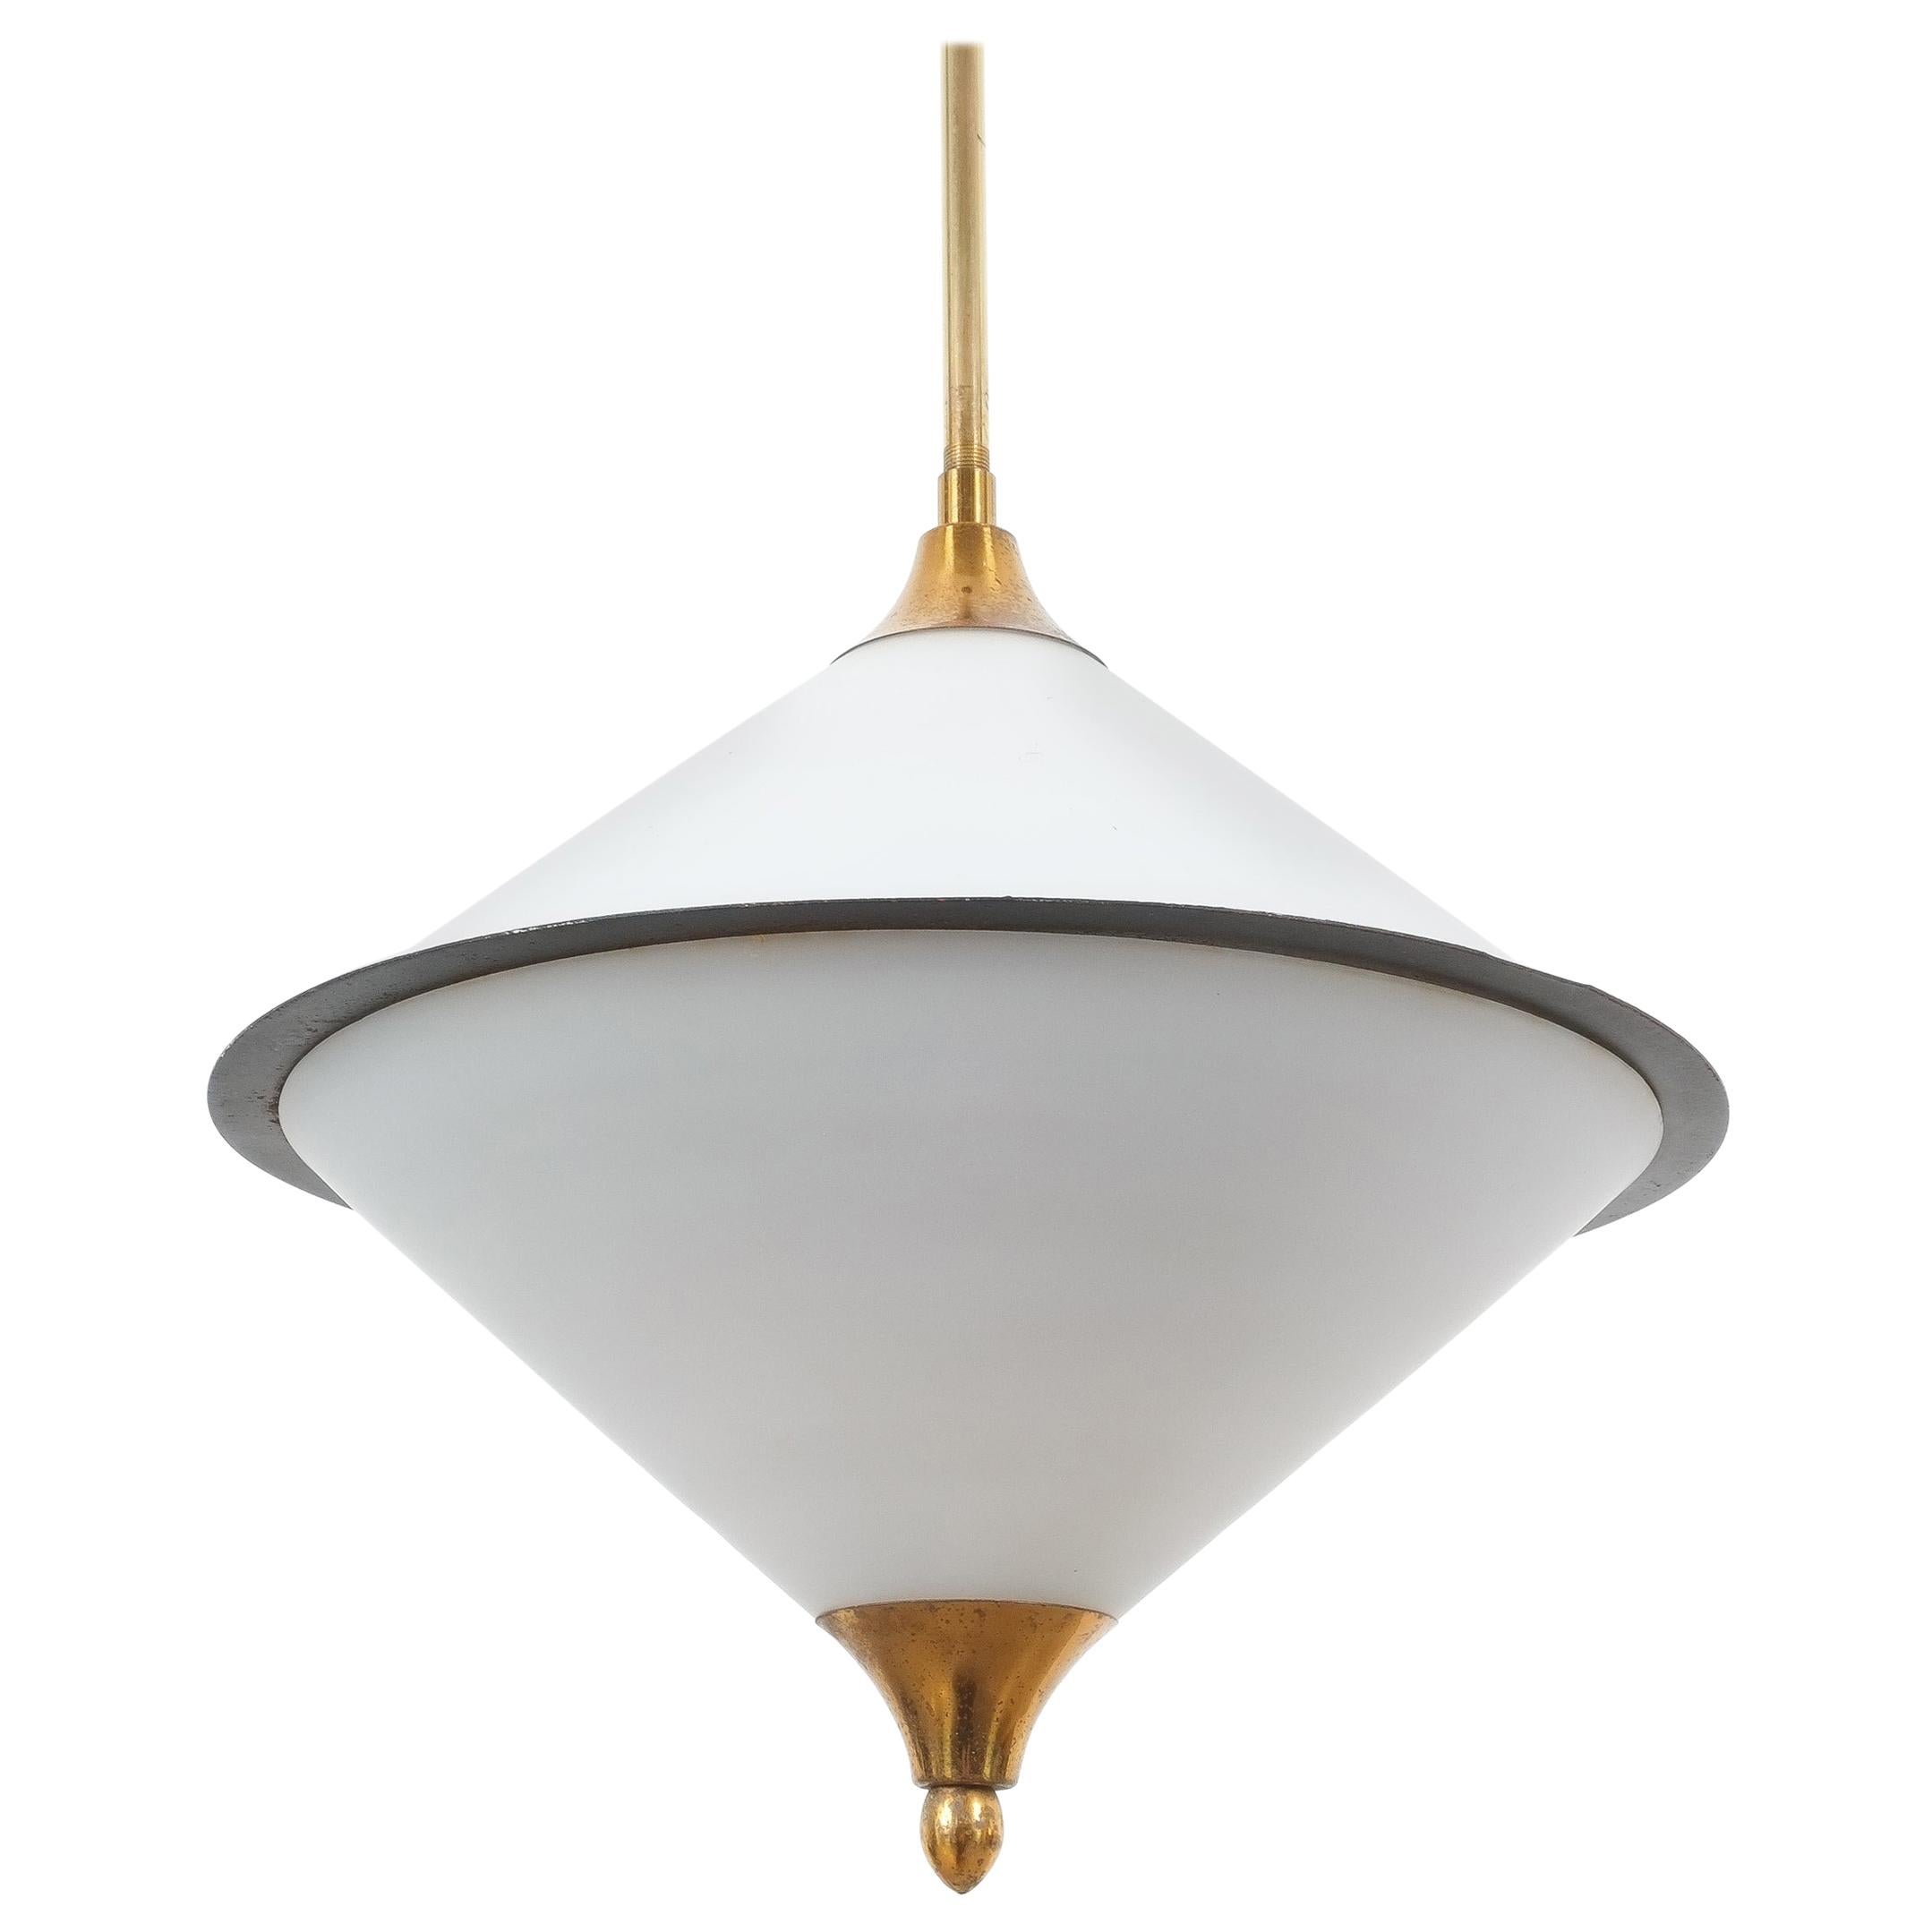 Rare Spin Top Shaped Pendant Lamp Opal Glass Attributed to Lelli, circa 1950